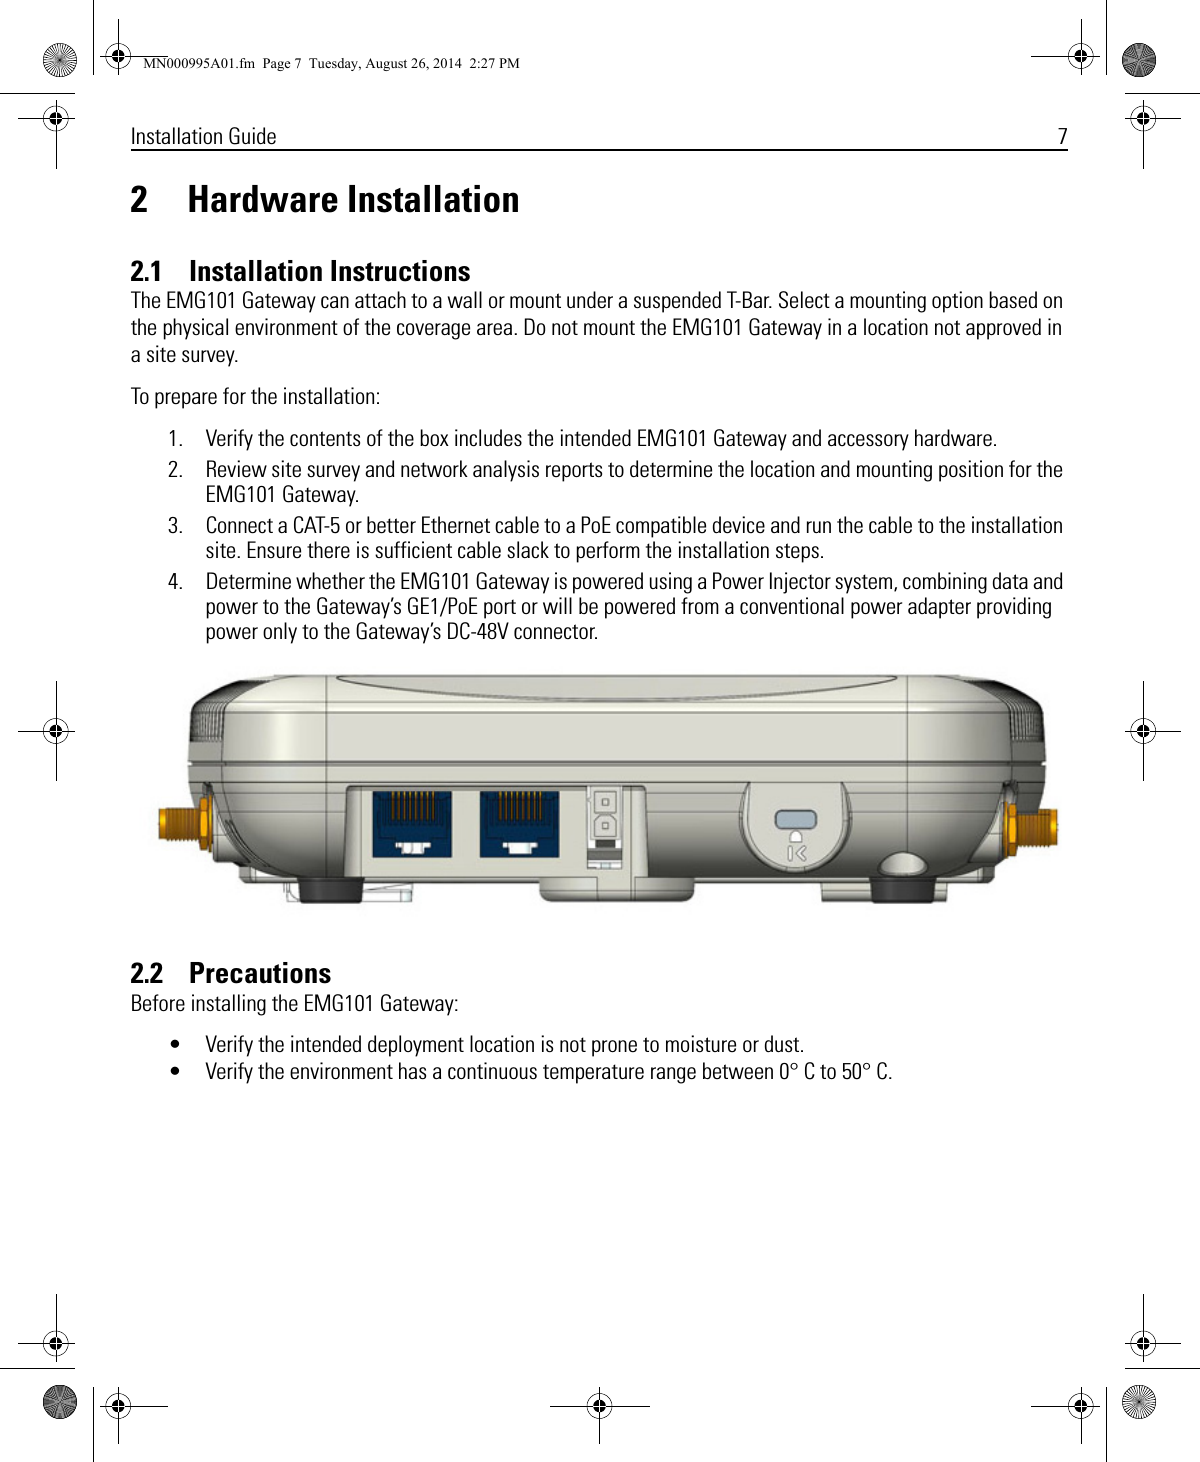 Installation Guide 72 Hardware Installation2.1    Installation InstructionsThe EMG101 Gateway can attach to a wall or mount under a suspended T-Bar. Select a mounting option based on the physical environment of the coverage area. Do not mount the EMG101 Gateway in a location not approved in a site survey.To prepare for the installation:1. Verify the contents of the box includes the intended EMG101 Gateway and accessory hardware.2. Review site survey and network analysis reports to determine the location and mounting position for the EMG101 Gateway.3. Connect a CAT-5 or better Ethernet cable to a PoE compatible device and run the cable to the installation site. Ensure there is sufficient cable slack to perform the installation steps.4. Determine whether the EMG101 Gateway is powered using a Power Injector system, combining data and power to the Gateway’s GE1/PoE port or will be powered from a conventional power adapter providing power only to the Gateway’s DC-48V connector.2.2    PrecautionsBefore installing the EMG101 Gateway:• Verify the intended deployment location is not prone to moisture or dust.• Verify the environment has a continuous temperature range between 0° C to 50° C.MN000995A01.fm  Page 7  Tuesday, August 26, 2014  2:27 PM